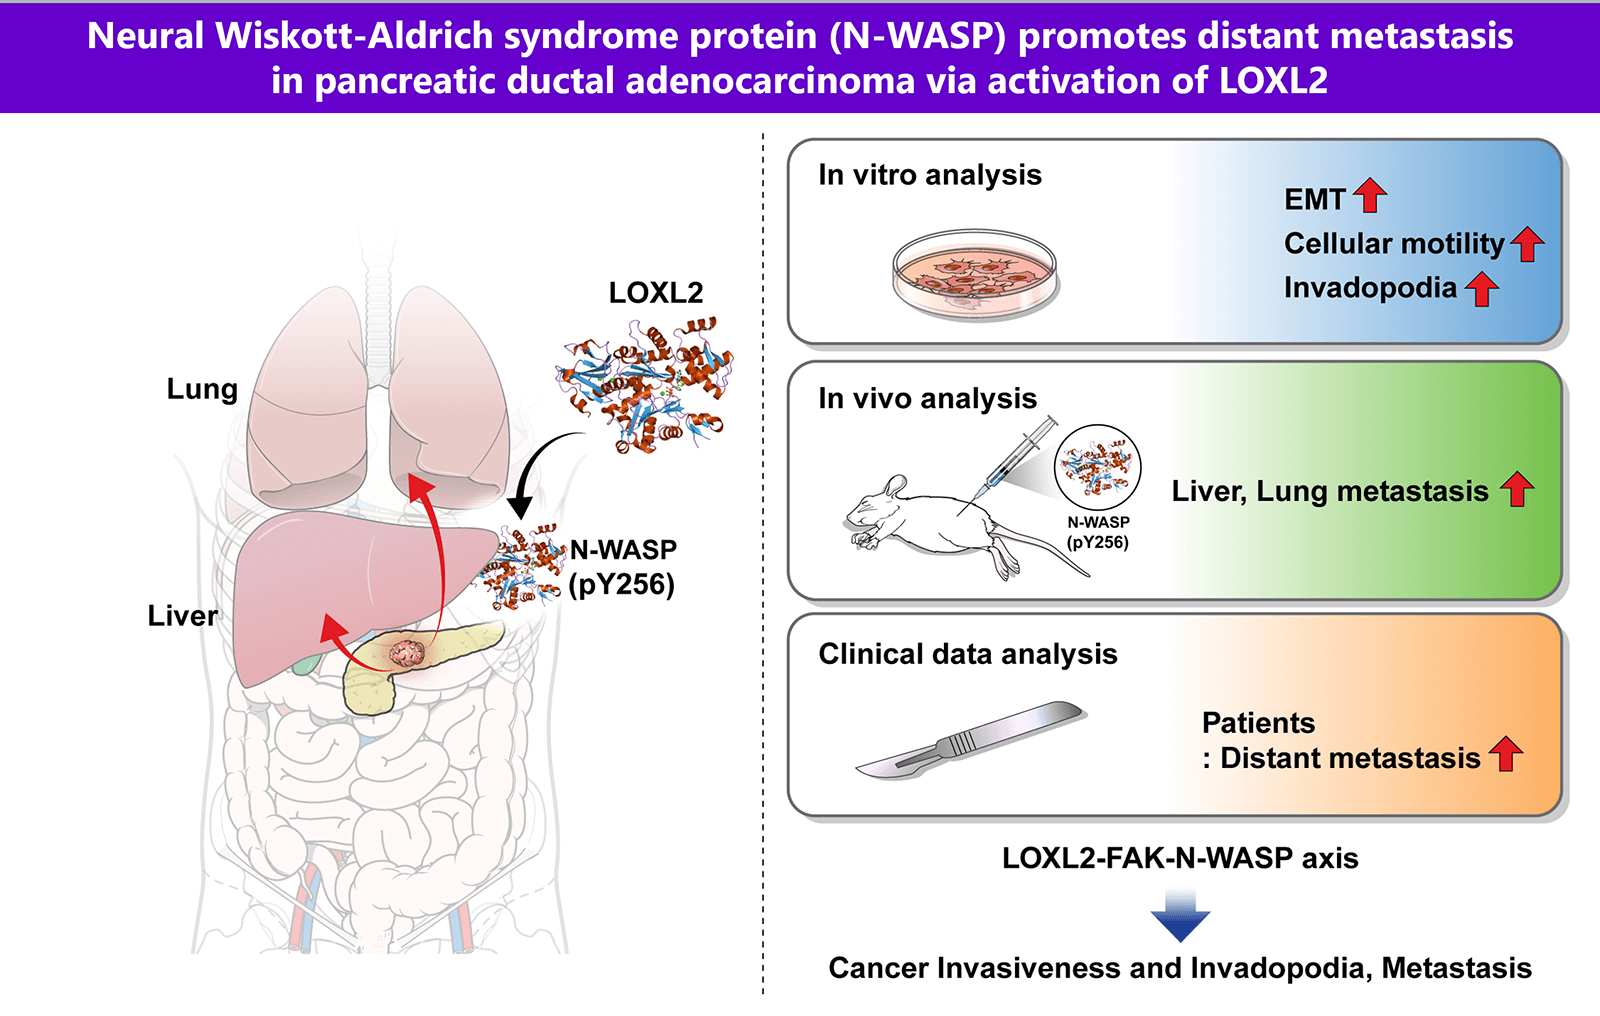 Neural Wiskott-Aldrich syndrome protein (N-WASP) promotes distant metastasis in pancreatic ductal adenocarcinoma via activation of LOXL2